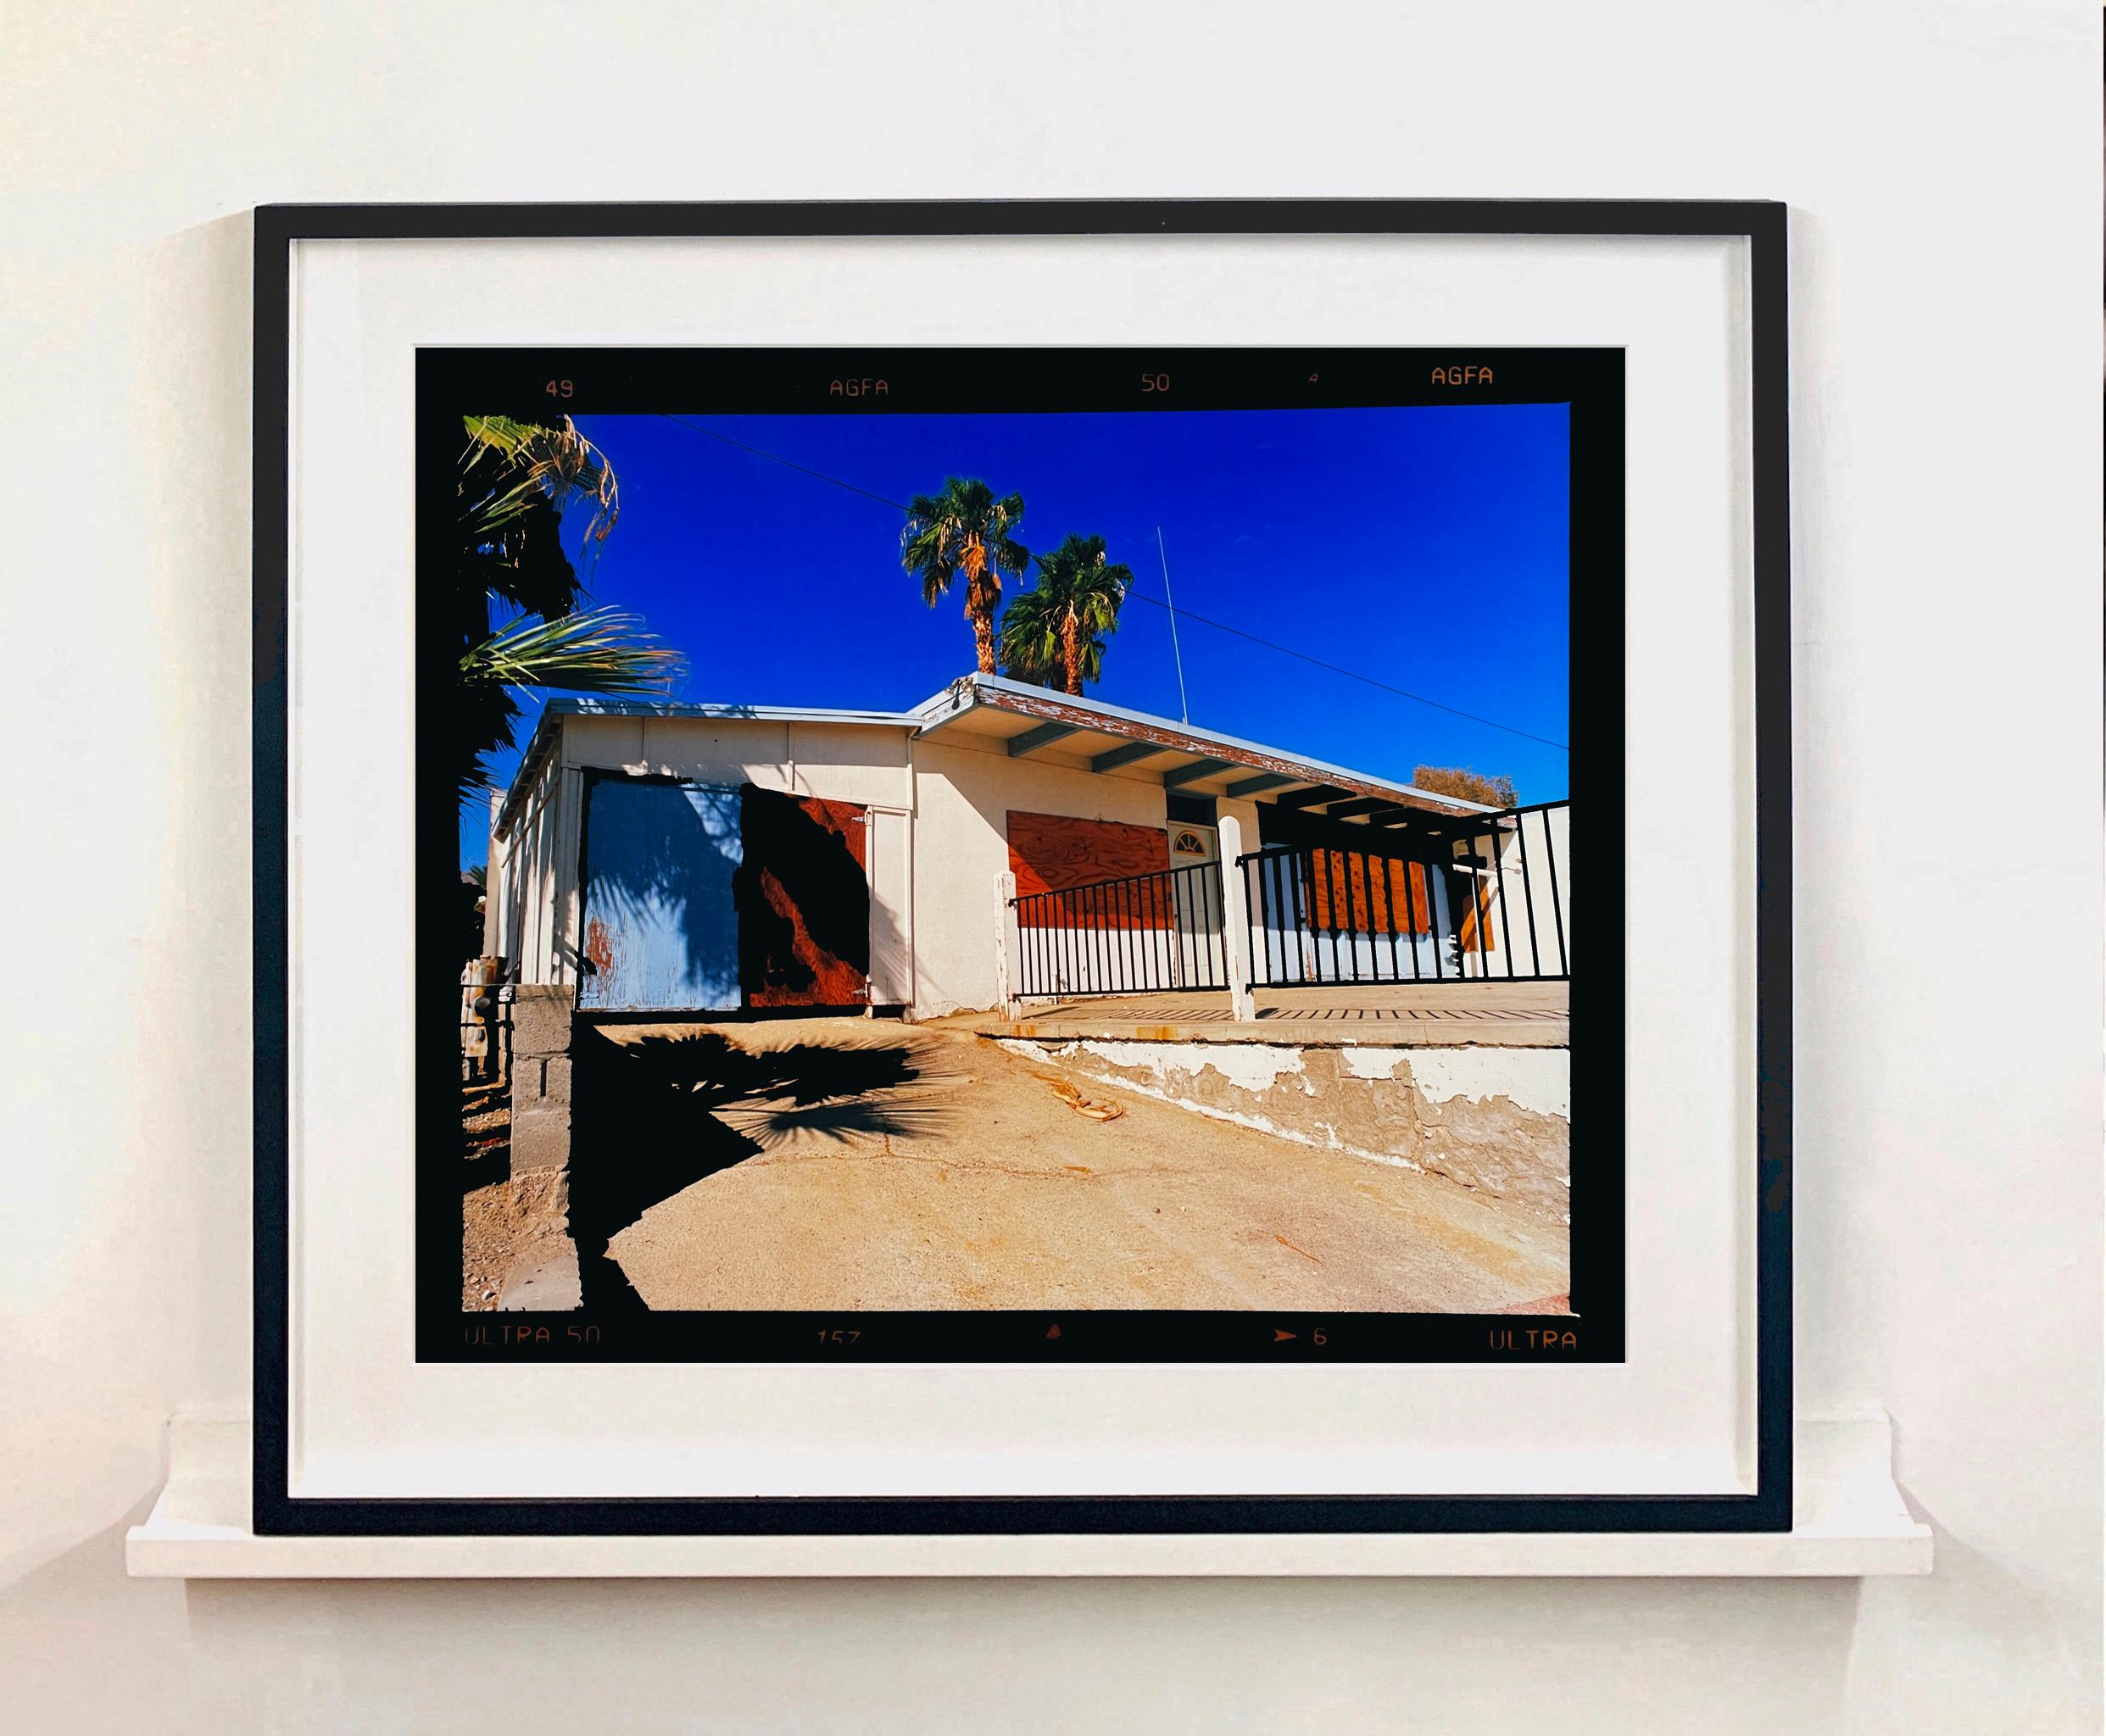 Motel Desert Shores, from Richard Heeps Salton Sea series. This picture has the a vibe of a Southern California American road trip, the colours are so seductive, the palm trees create a desert oasis amongst mid 20th Century architecture. The light